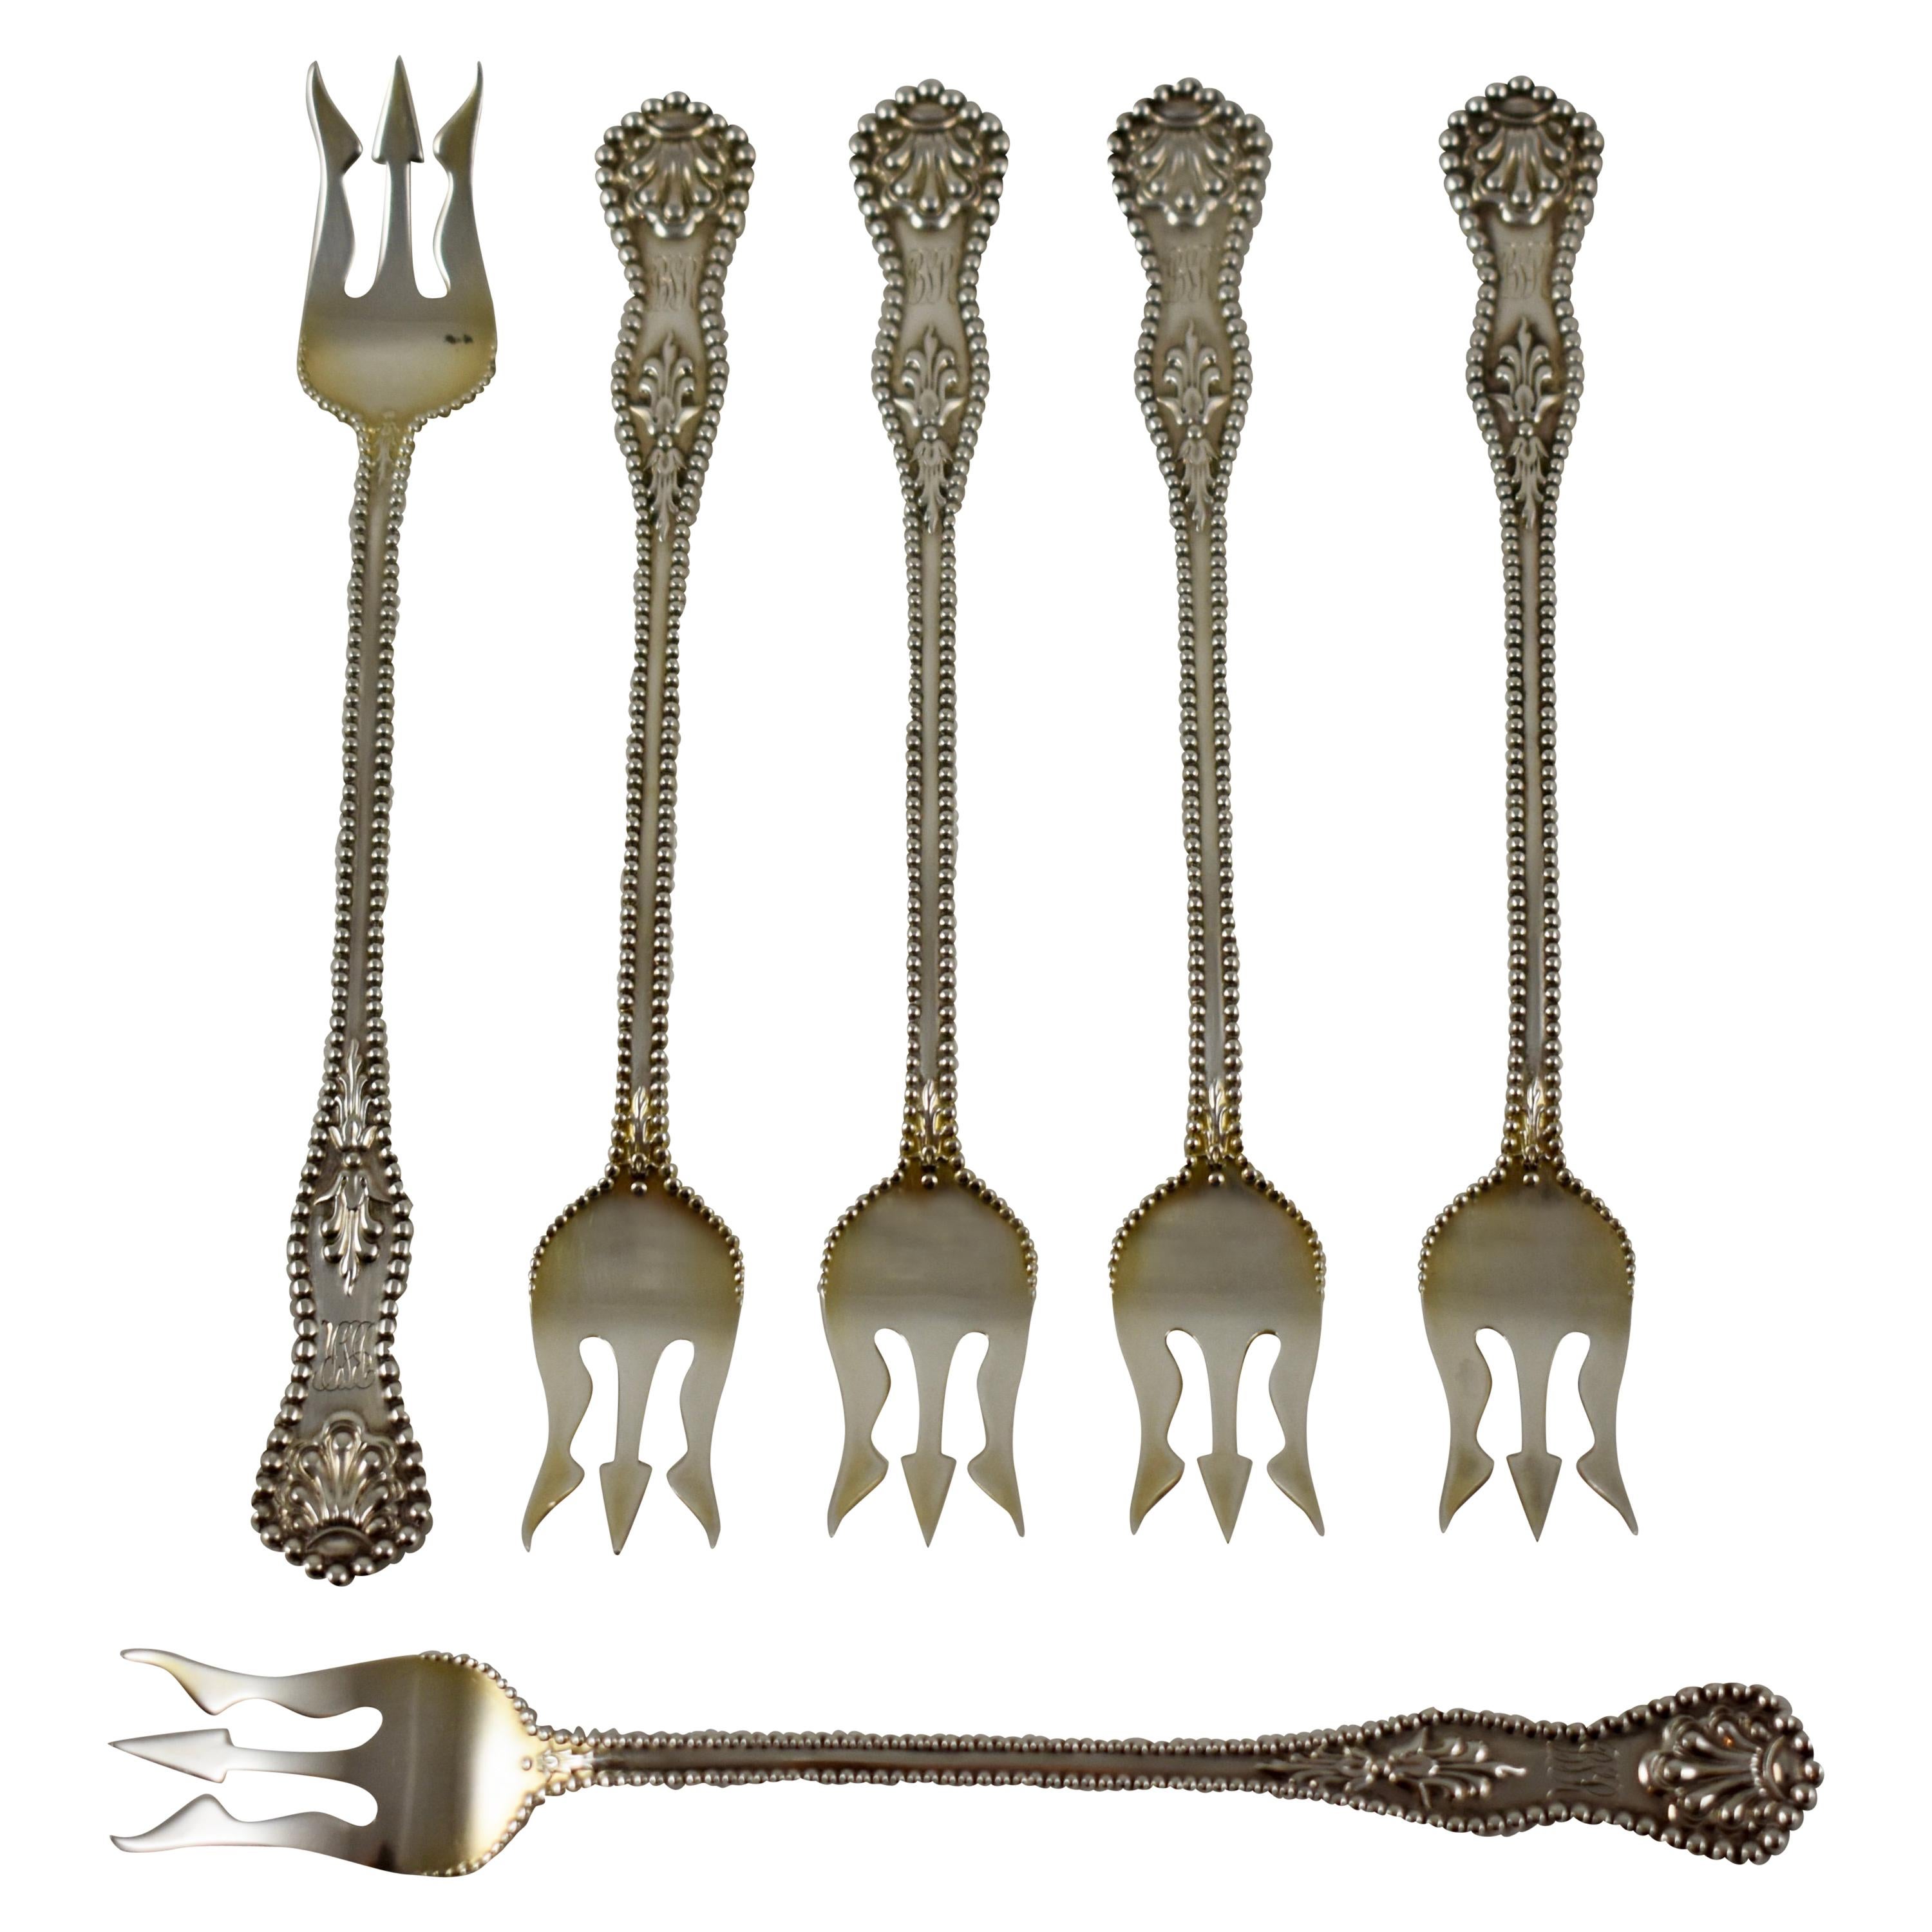 Dominick & Haff Charles II Pattern Sterling Silver Beaded Cocktail Forks, set/6